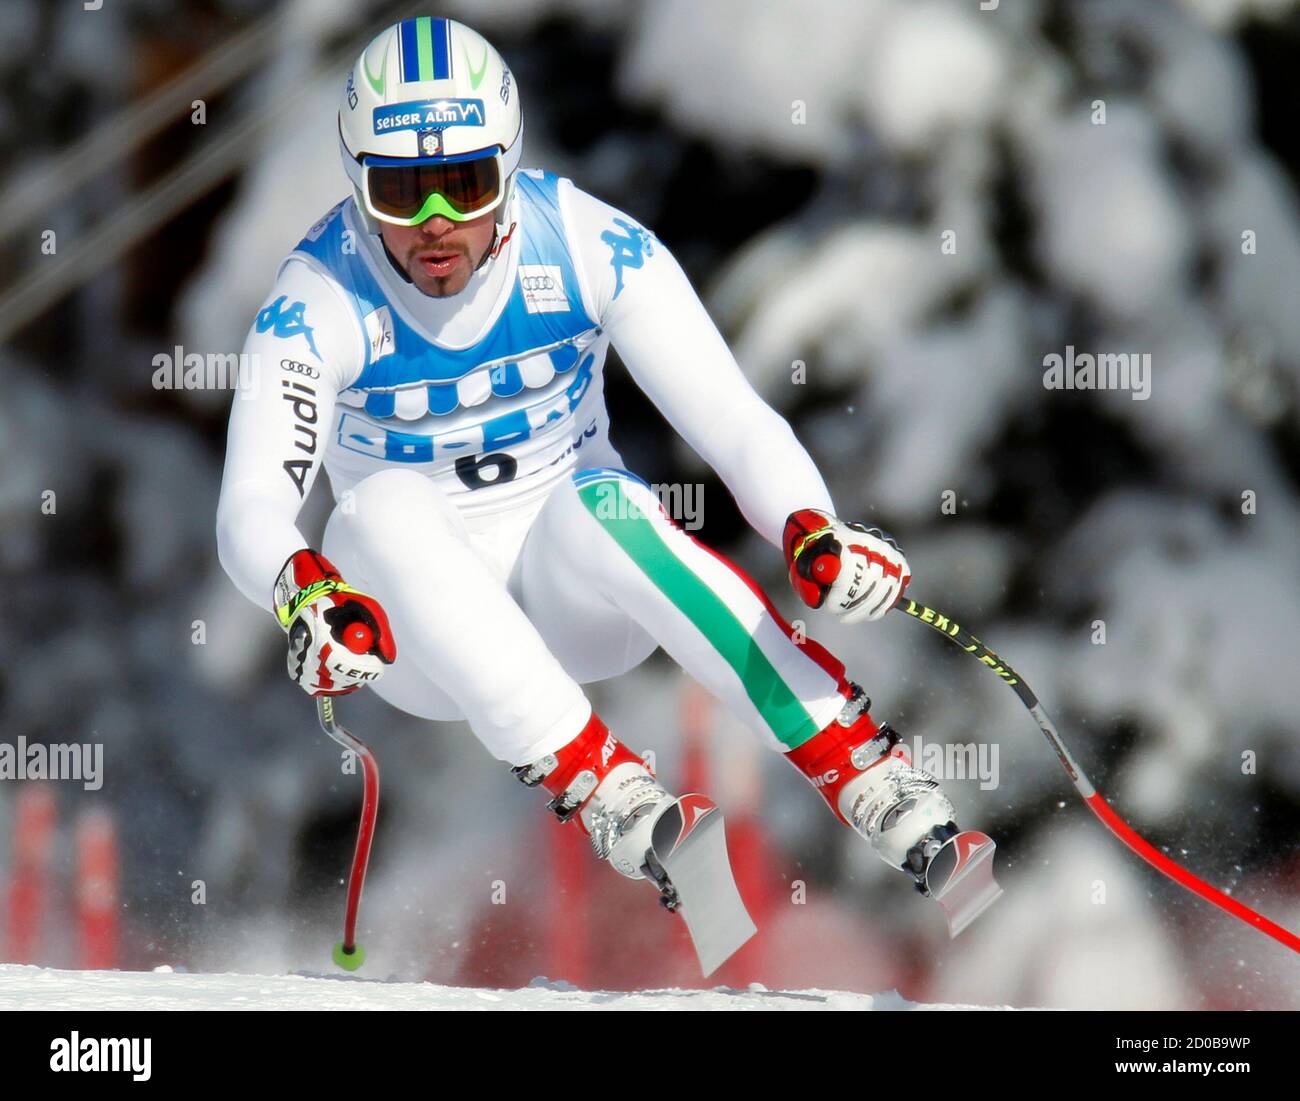 Peter Fill of Italy makes turn during alpine skiing training for the Men's World Cup Downhill in Lake Louise, Alberta November 24, 2011.    REUTERS/Mike Blake     (CANADA - Tags: SPORT SKIING) Stock Photo